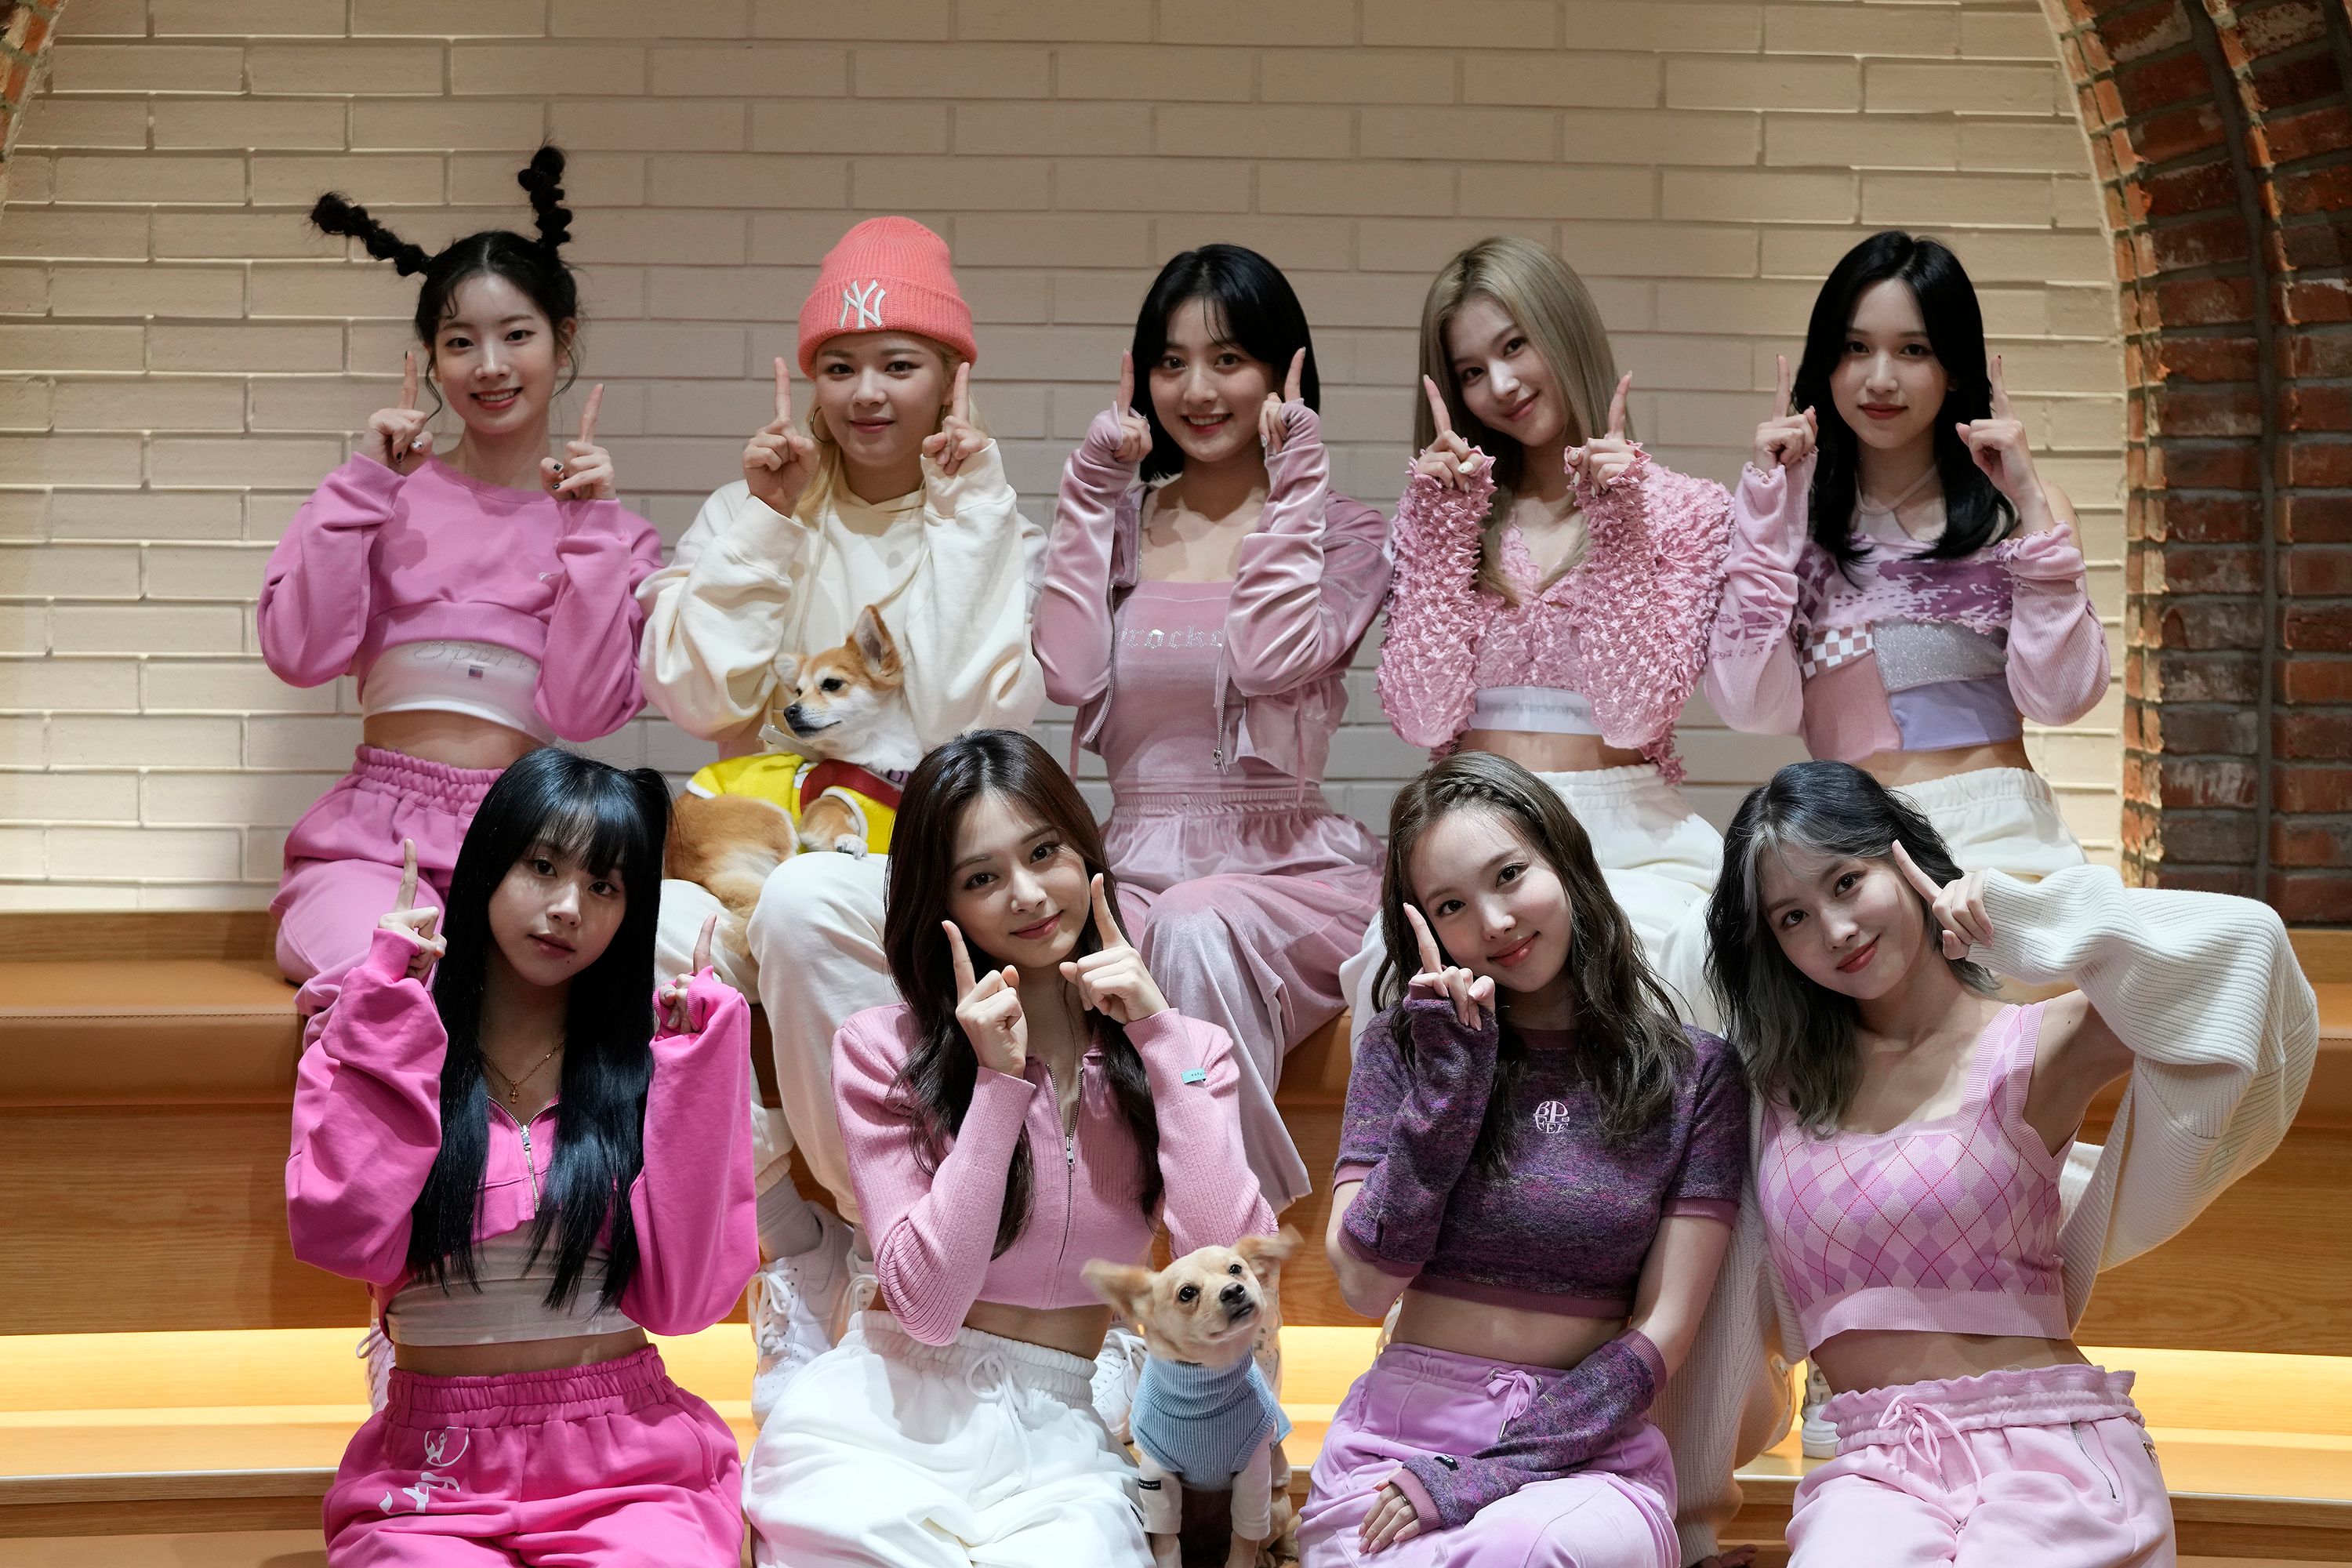 K-pop band TWICE basking in global popularity, plans US tour | The 